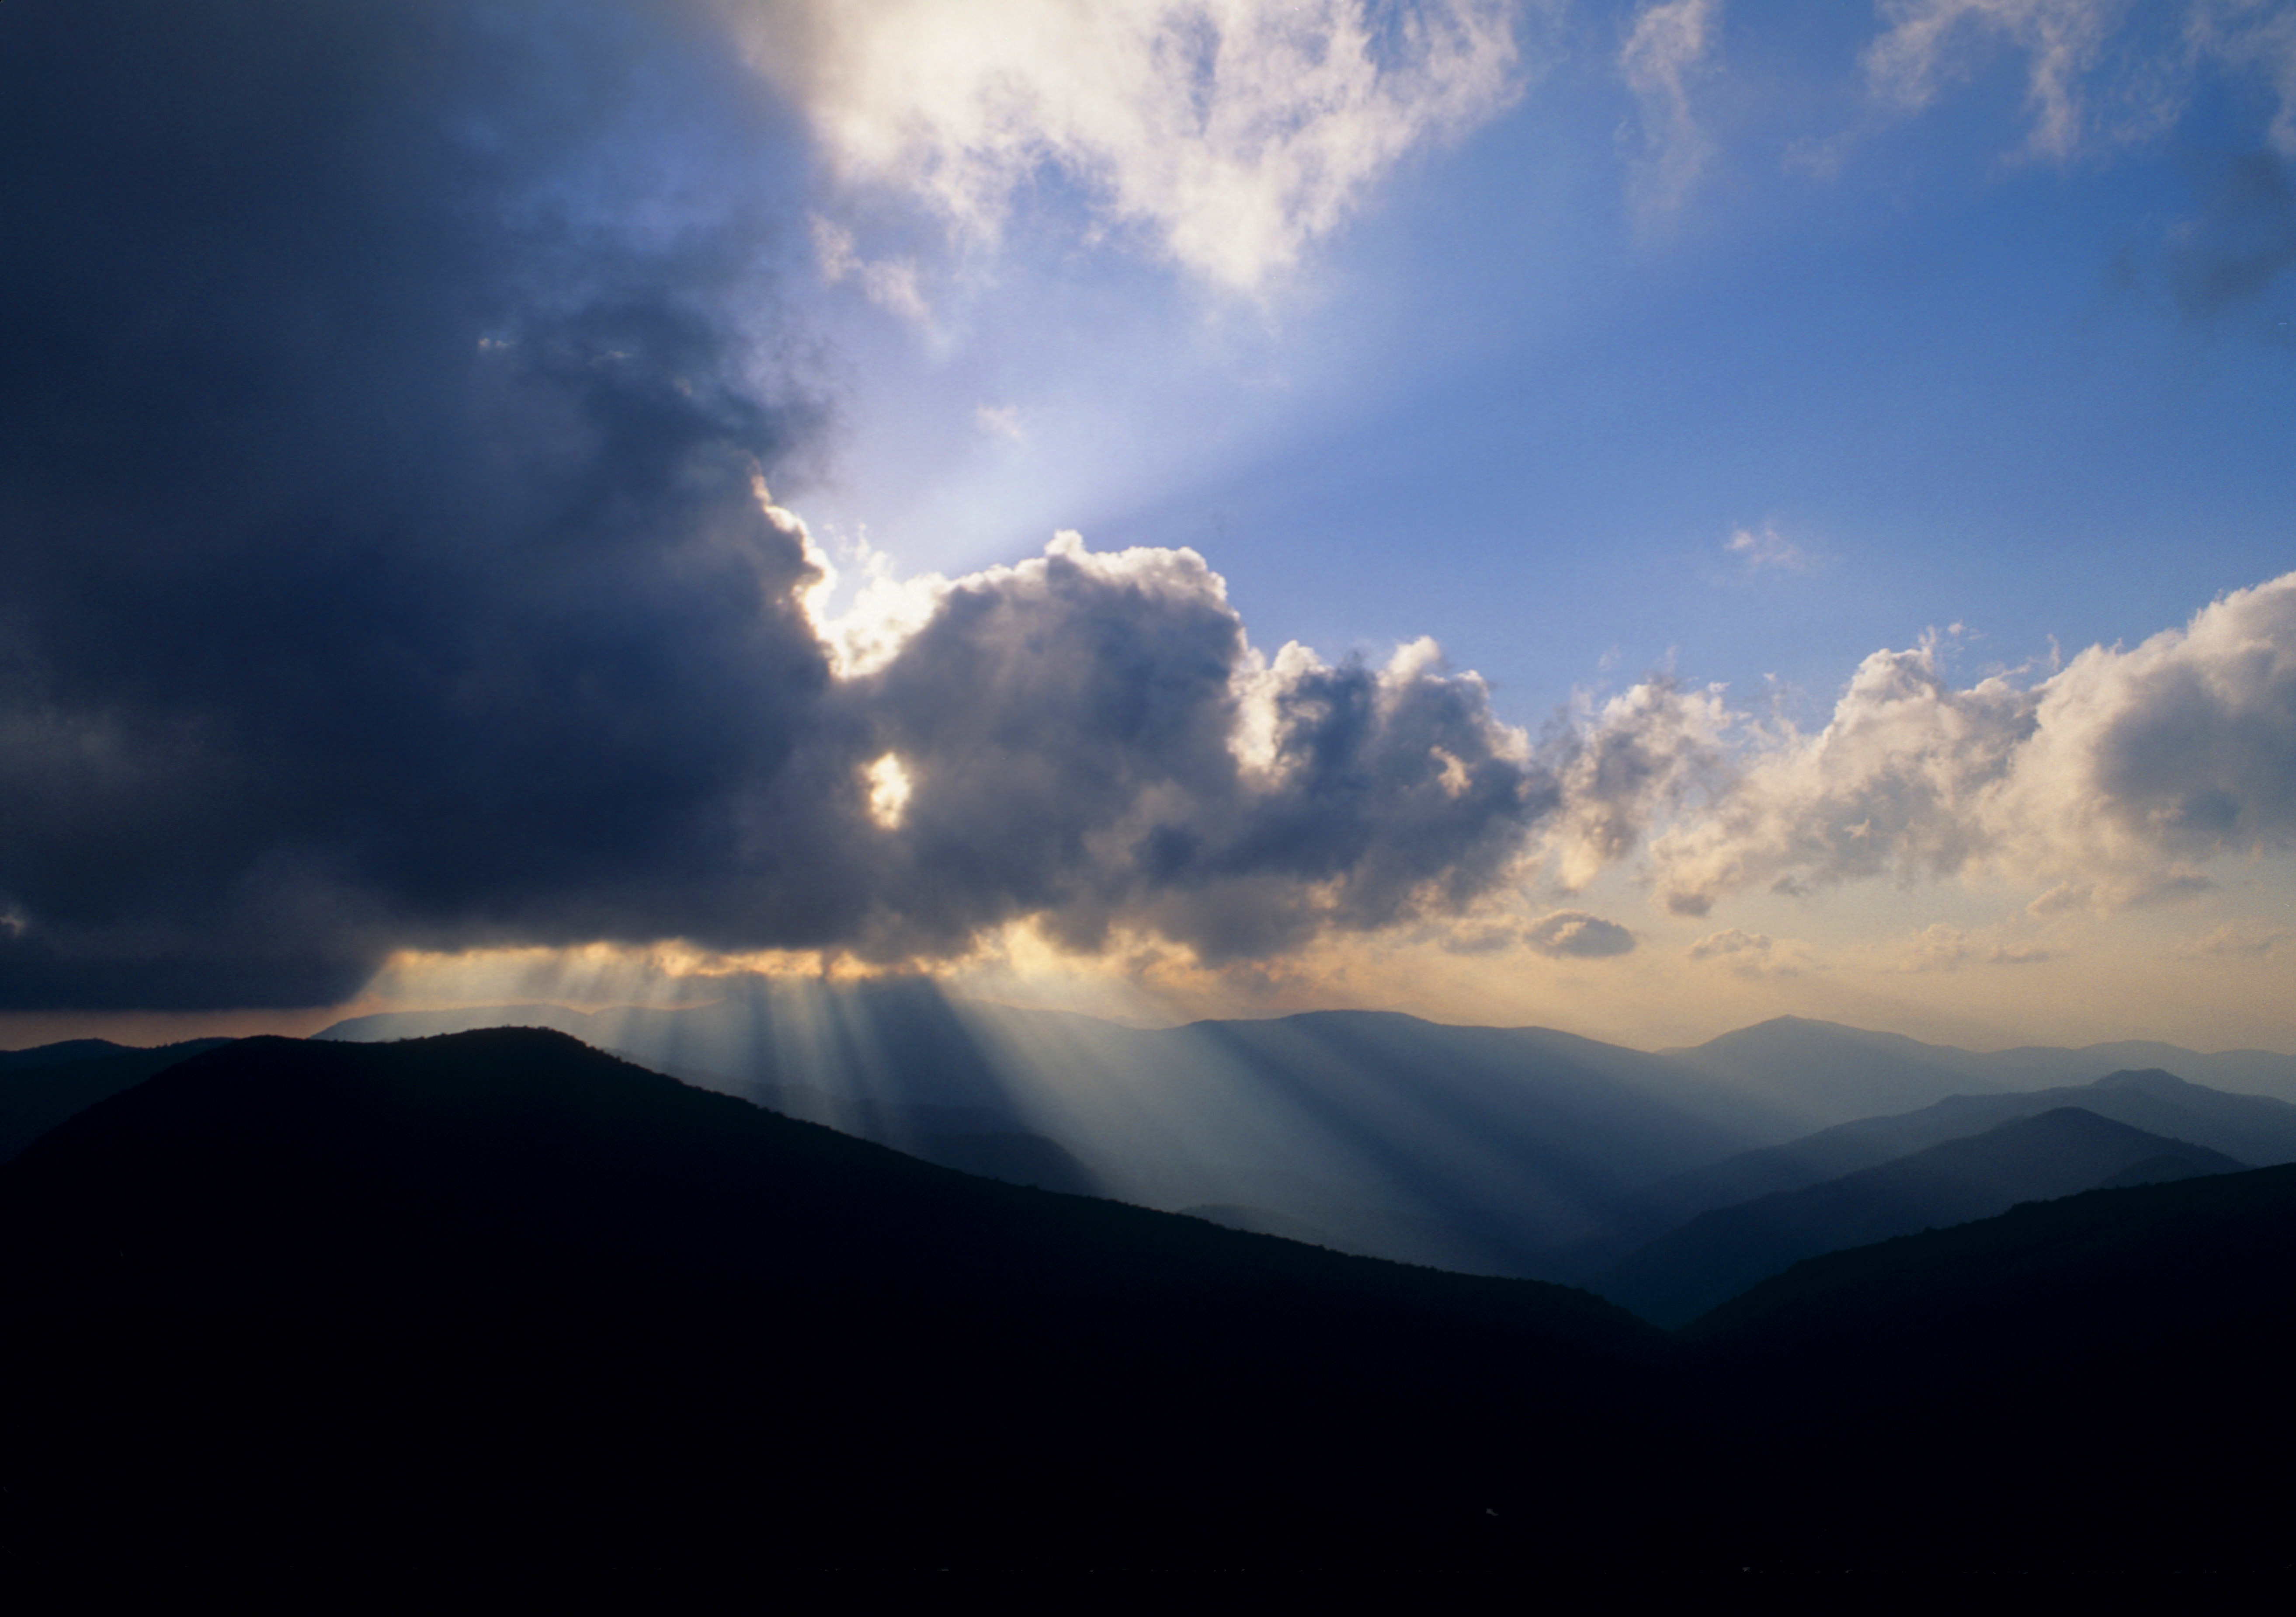 Crepuscular rays  -  from the summit of Black Balsam Knob, Pisgah National Forest, North Carolina